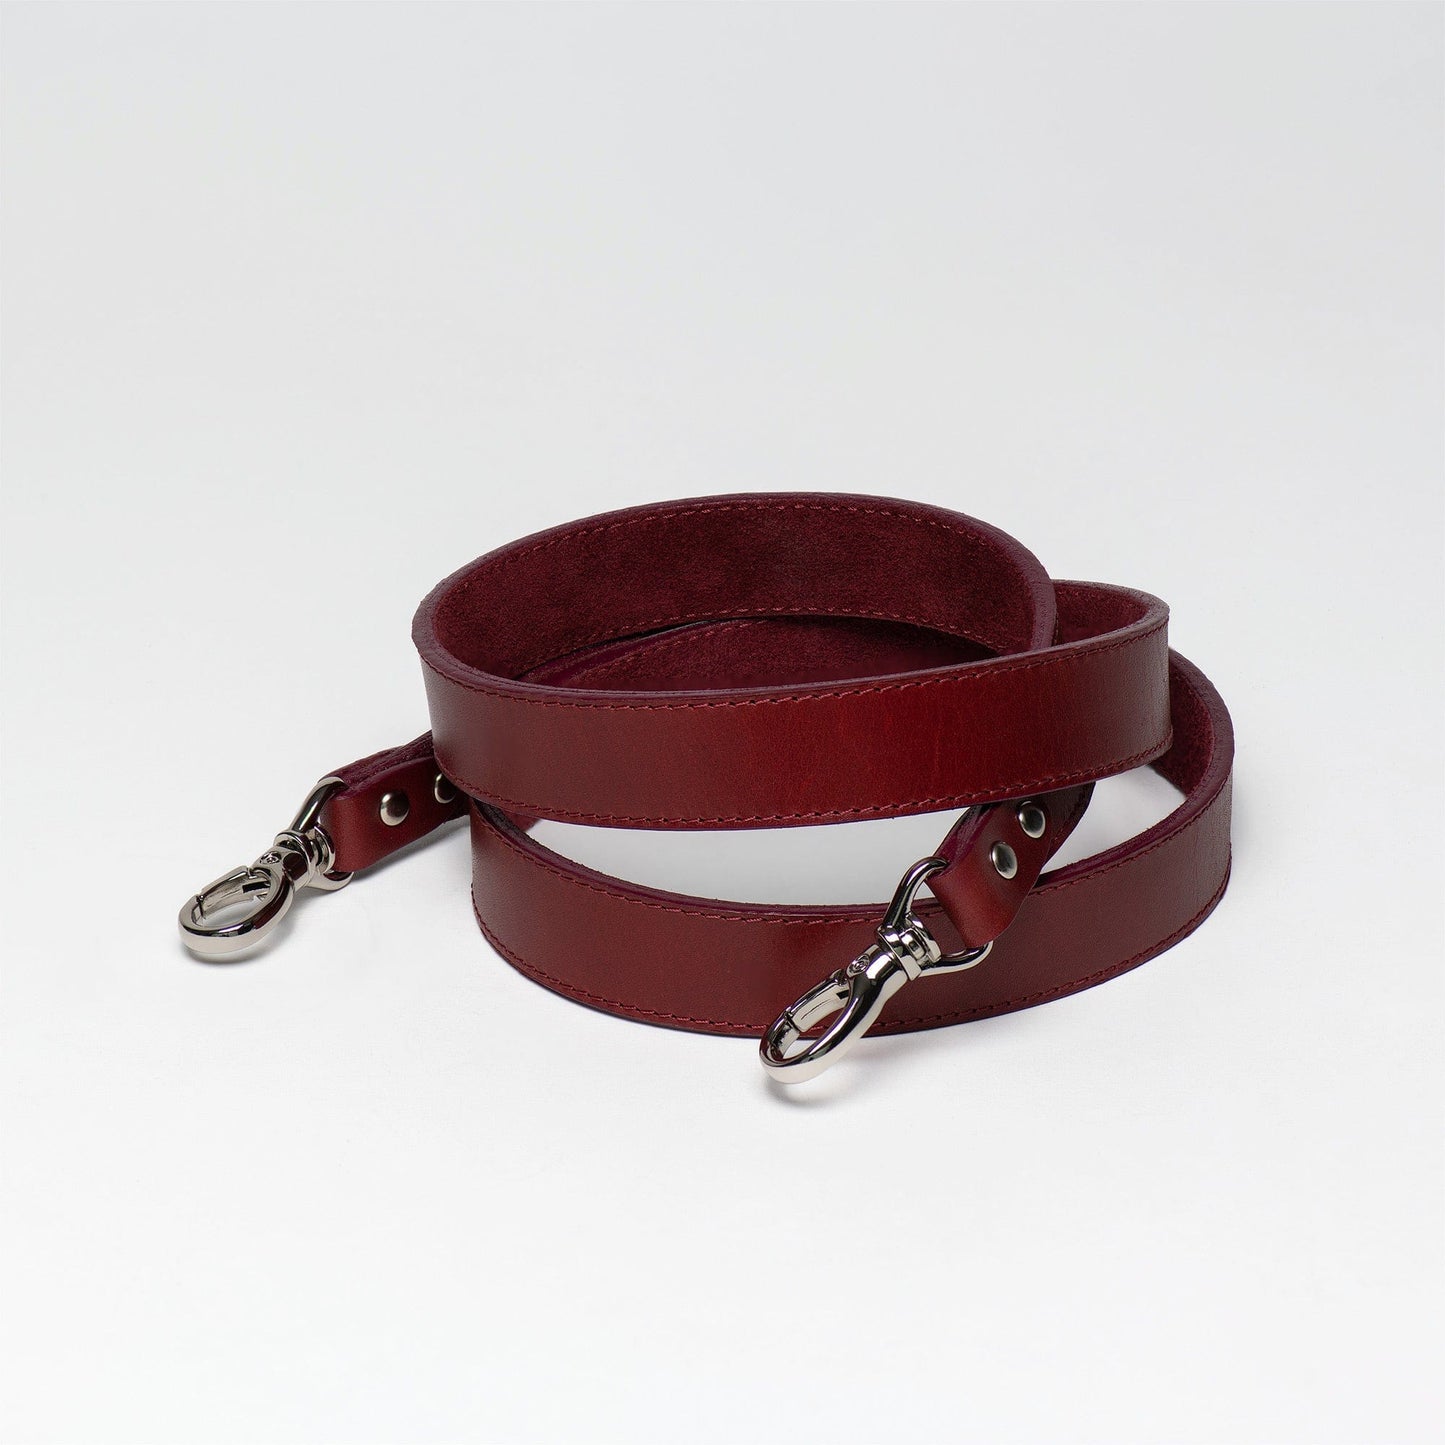 Leather Purse Strap Soft Suede Lining Wine Color – Feature